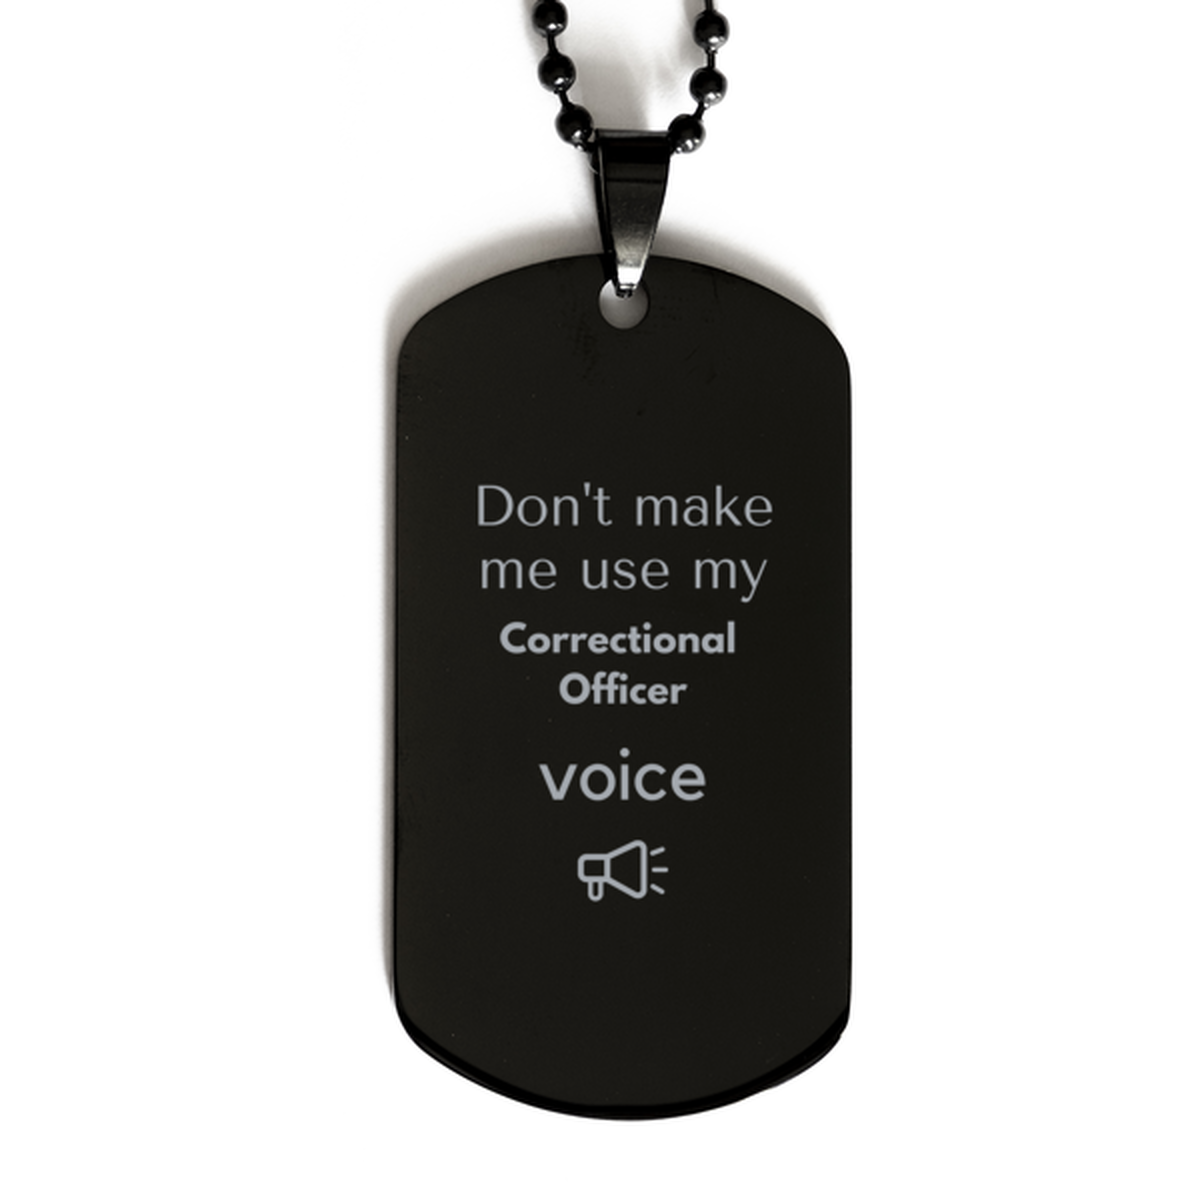 Don't make me use my Correctional Officer voice, Sarcasm Correctional Officer Gifts, Christmas Correctional Officer Black Dog Tag Birthday Unique Gifts For Correctional Officer Coworkers, Men, Women, Colleague, Friends